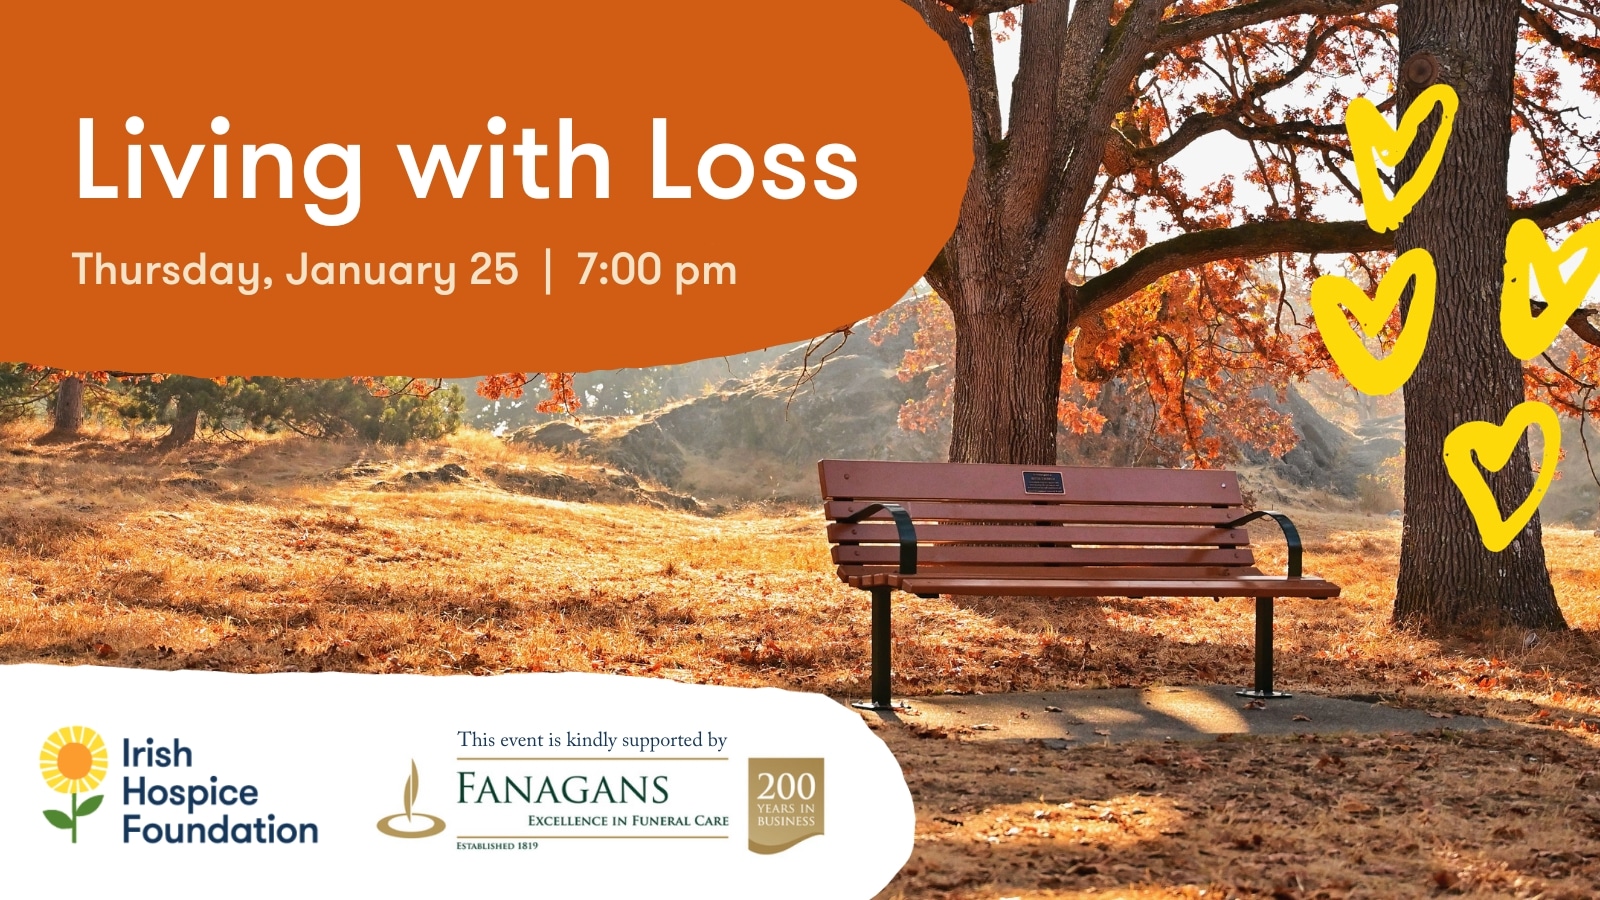 An image promoting Irish Hospice Foundation's National Grief Awareness Week 2024 event called "Living with Loss", taking place on Thursday, January 25, 2024.